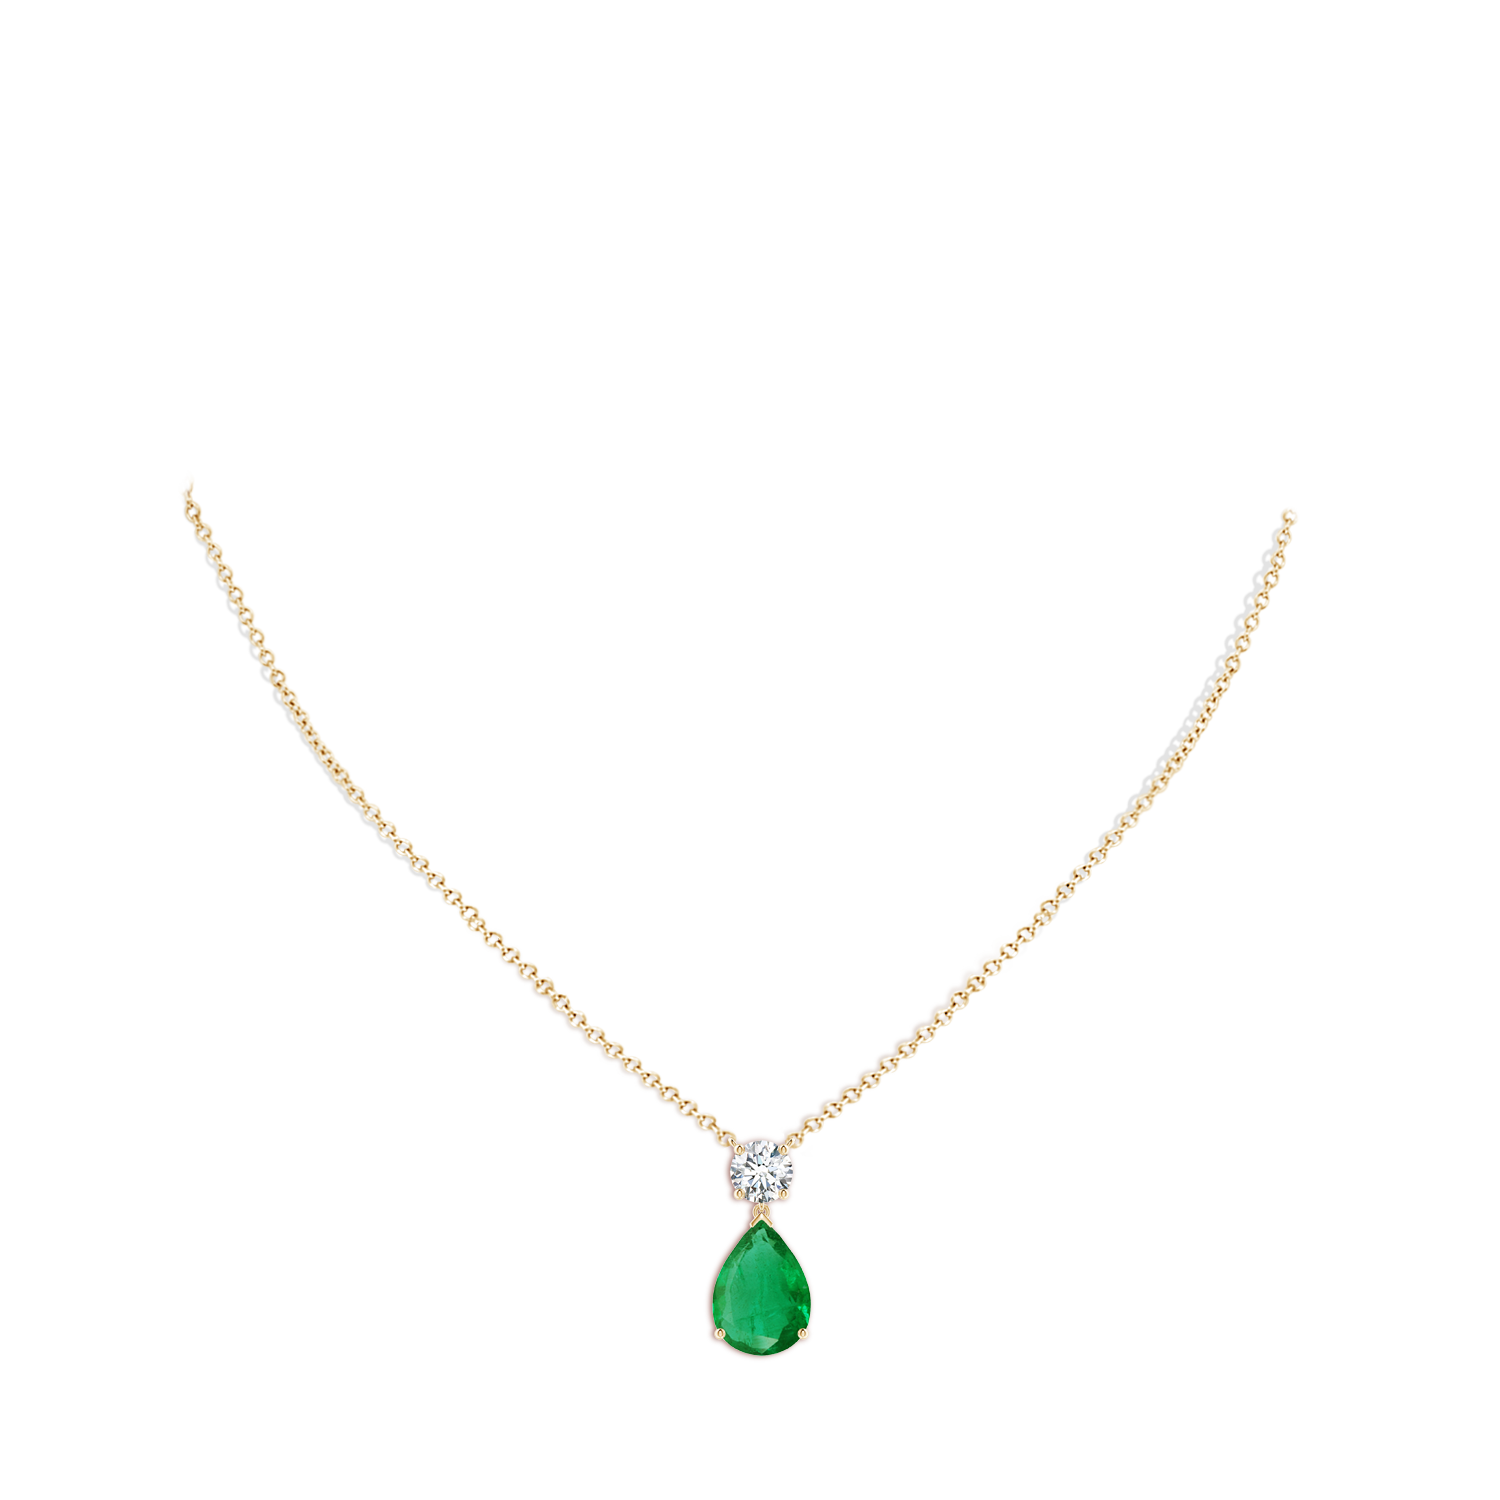 AA - Emerald / 7.6 CT / 14 KT Yellow Gold